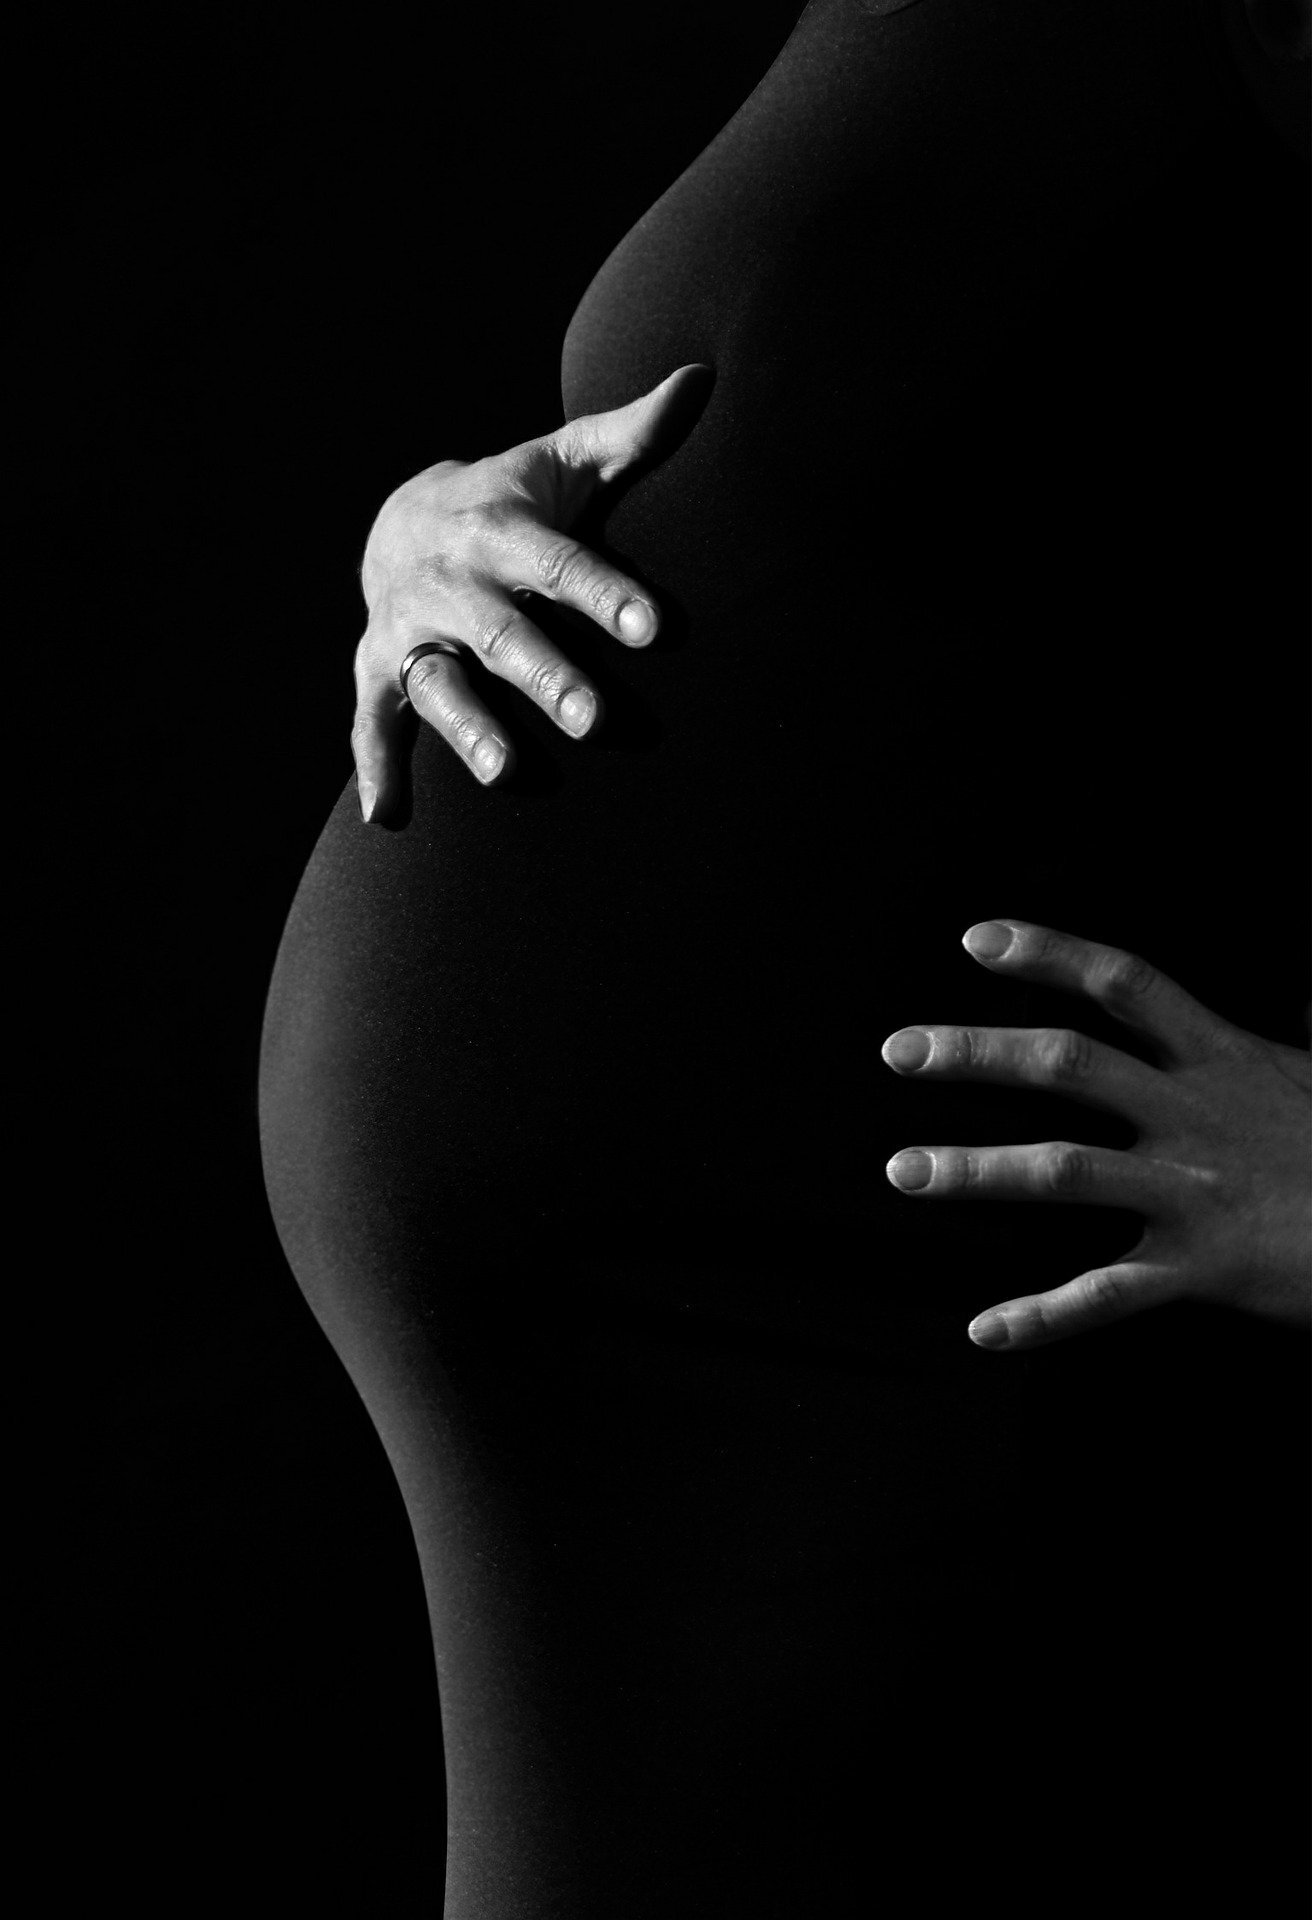 #New study gives a more accurate picture of pregnancy-related diabetes risks